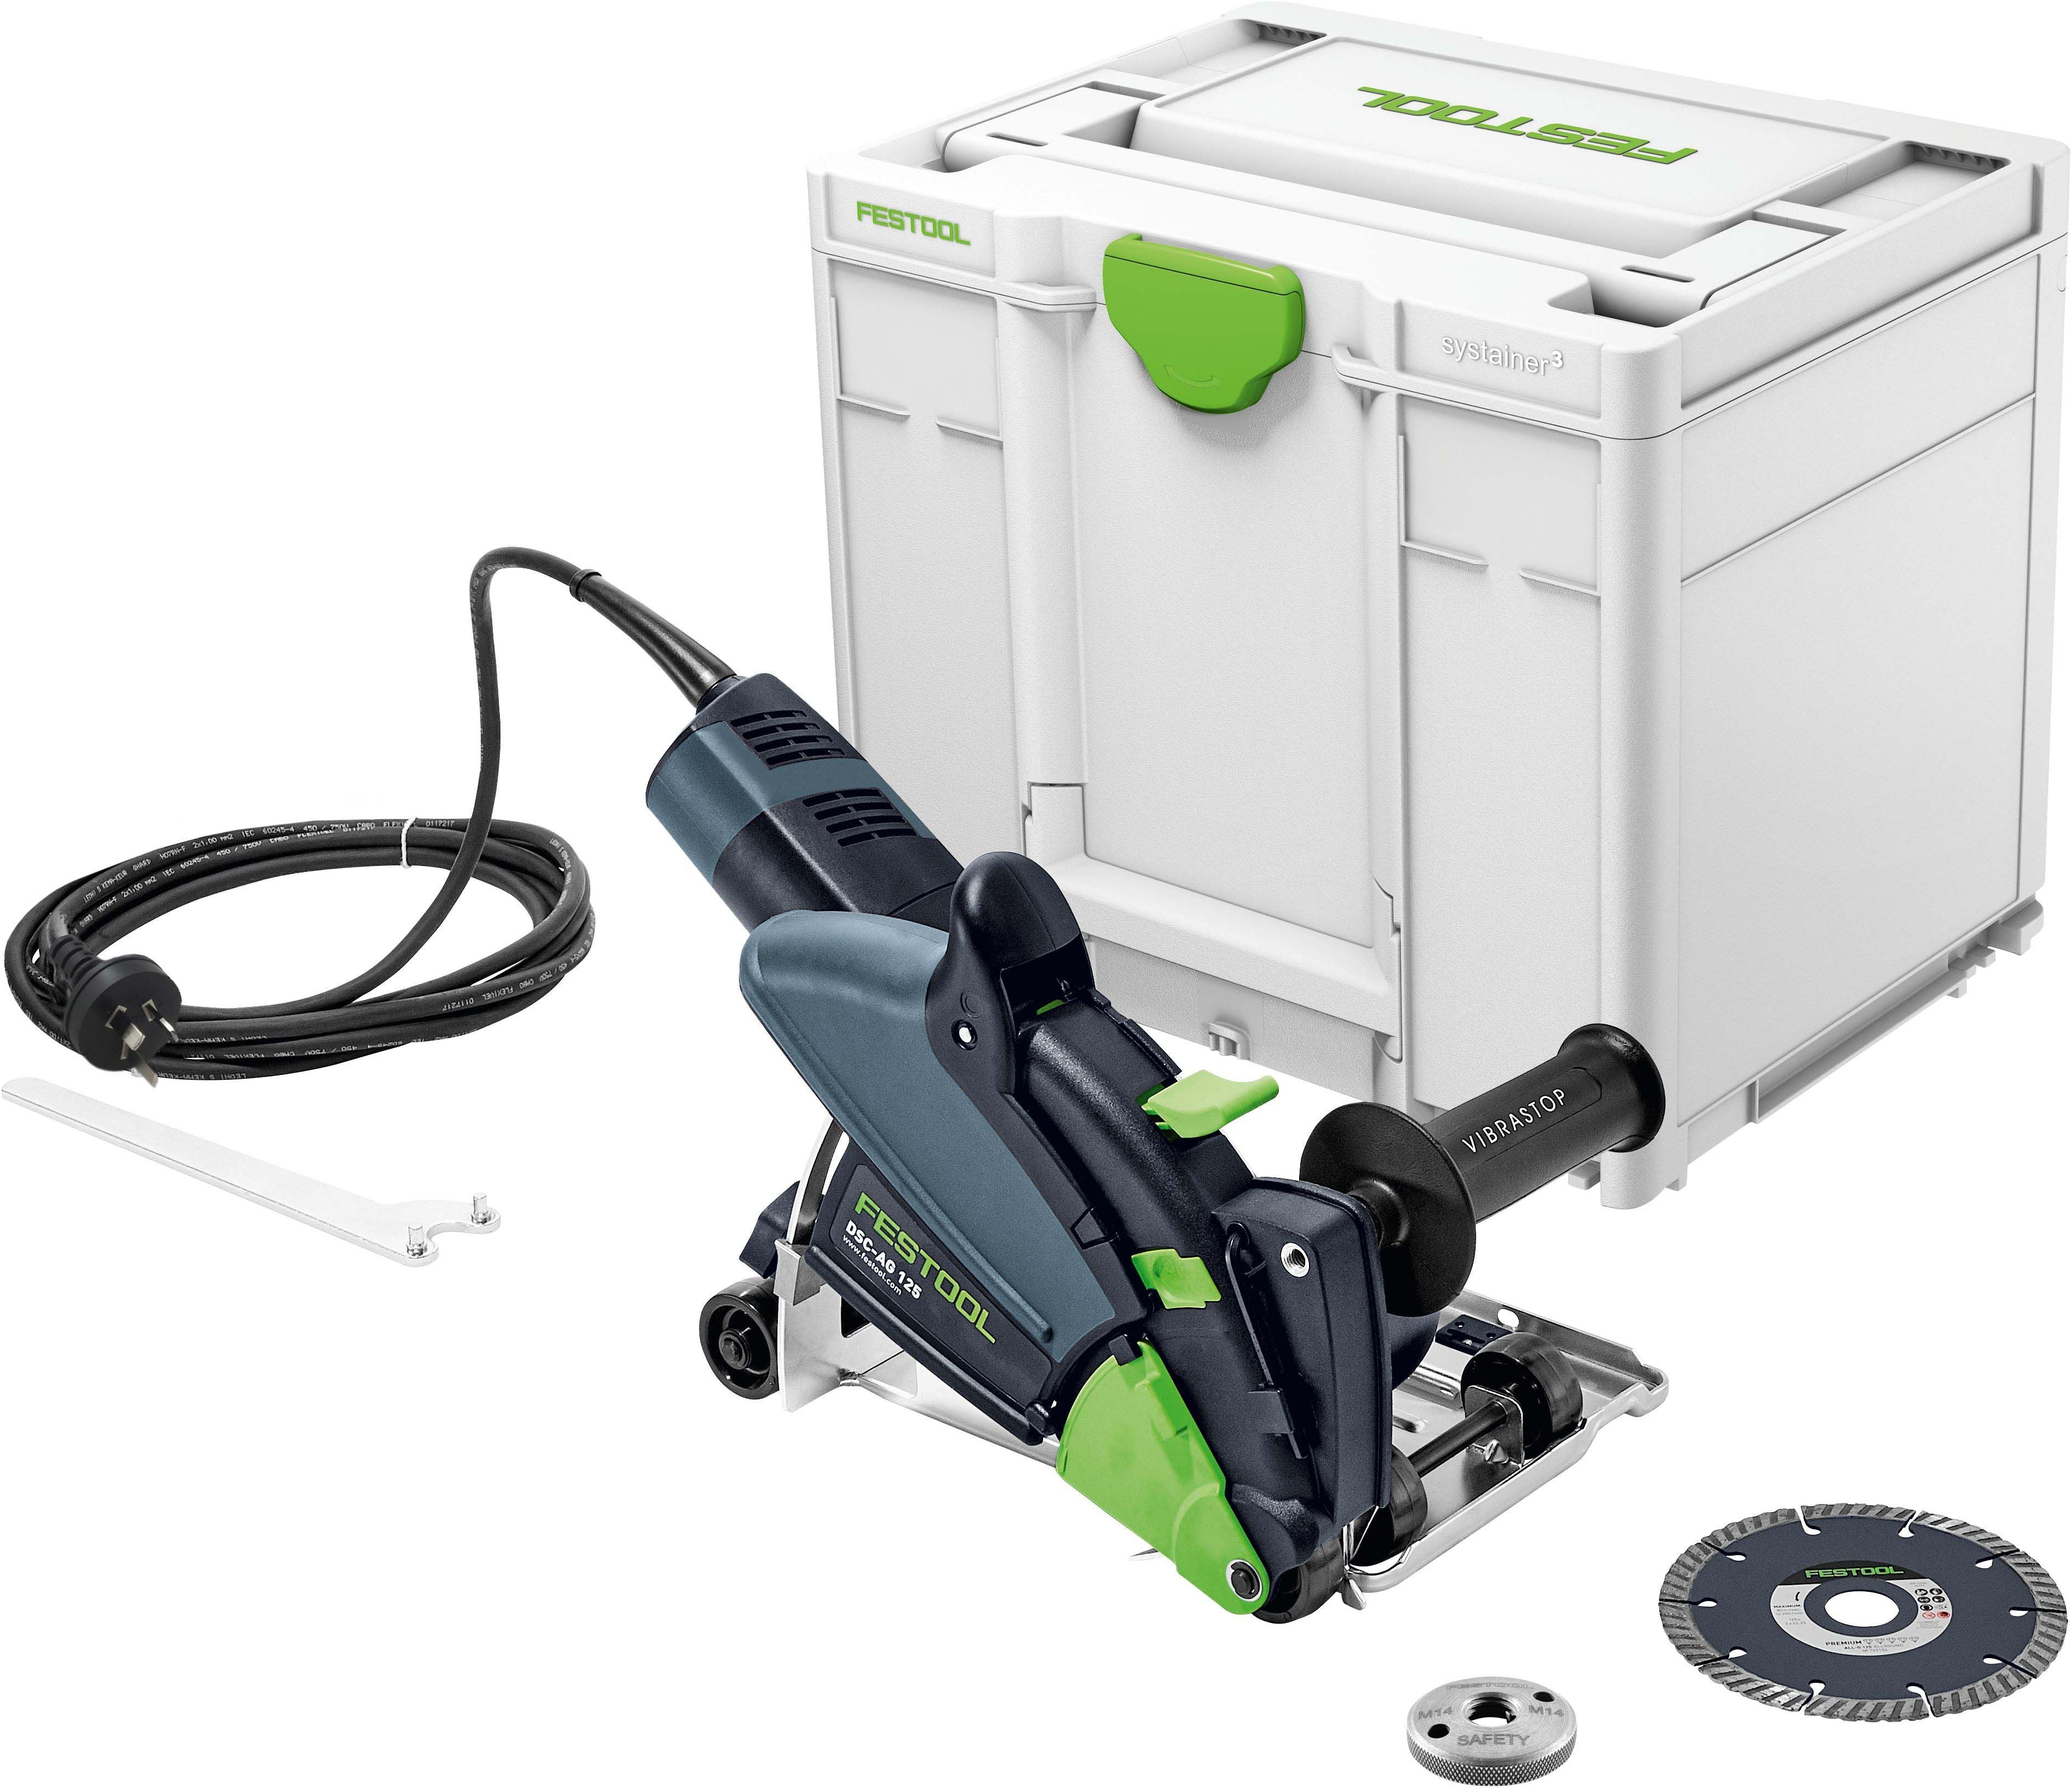 125mm Diamond Cutting System in Systainer DSC-AG 125PLUS 576548 By Festool